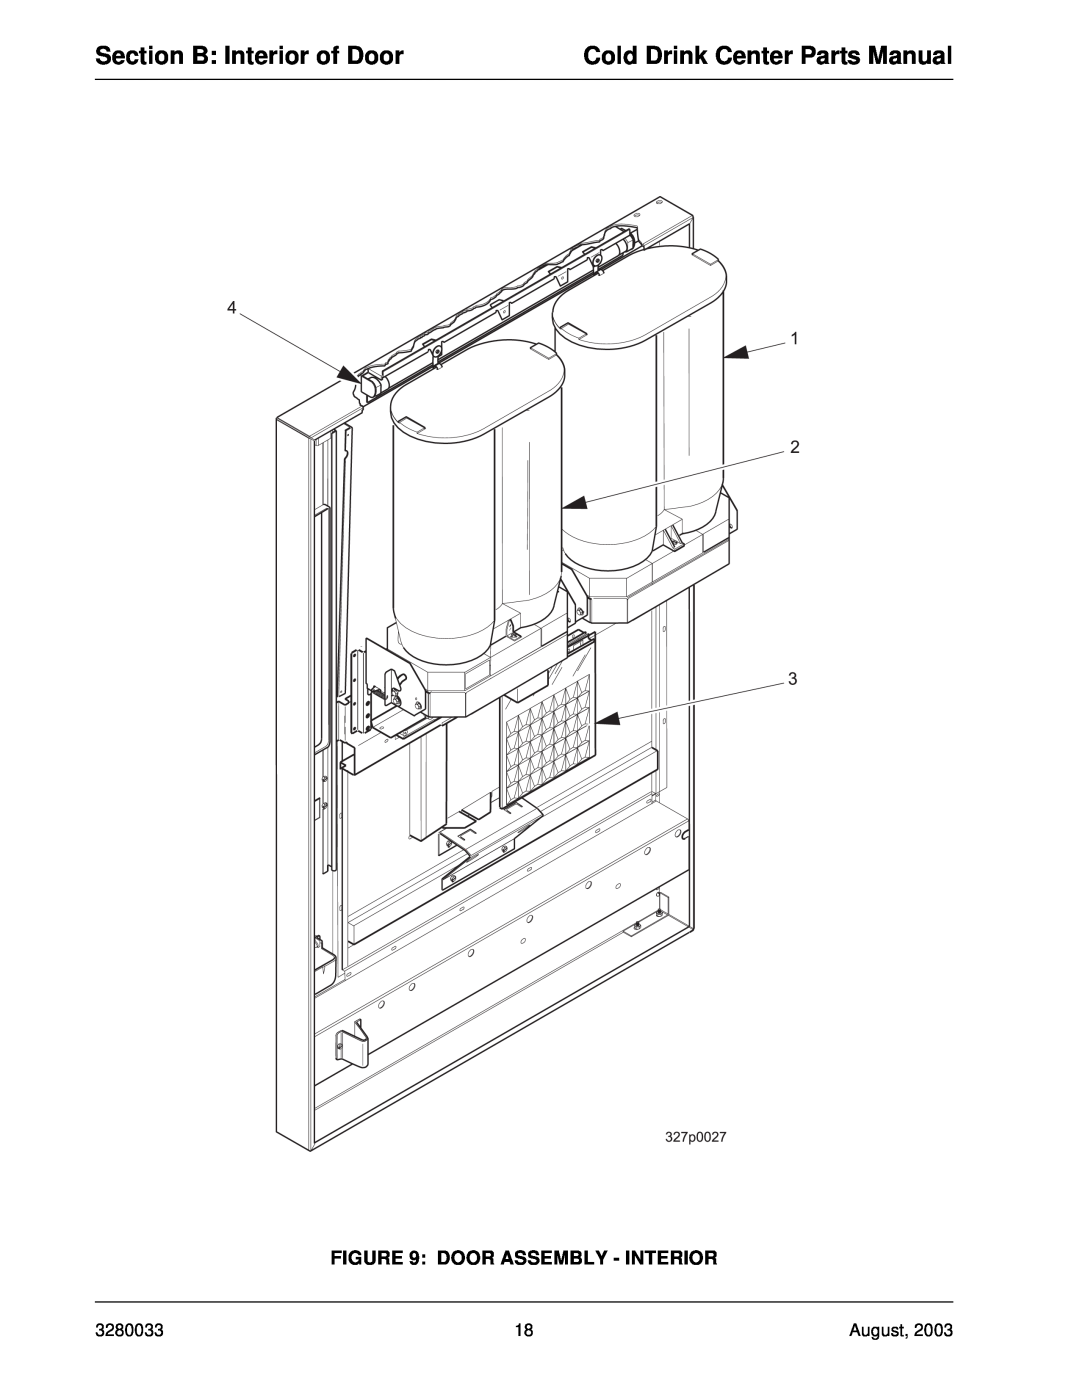 Crane Merchandising Systems 328, 327 Section B Interior of Door, Cold Drink Center Parts Manual, Door Assembly - Interior 